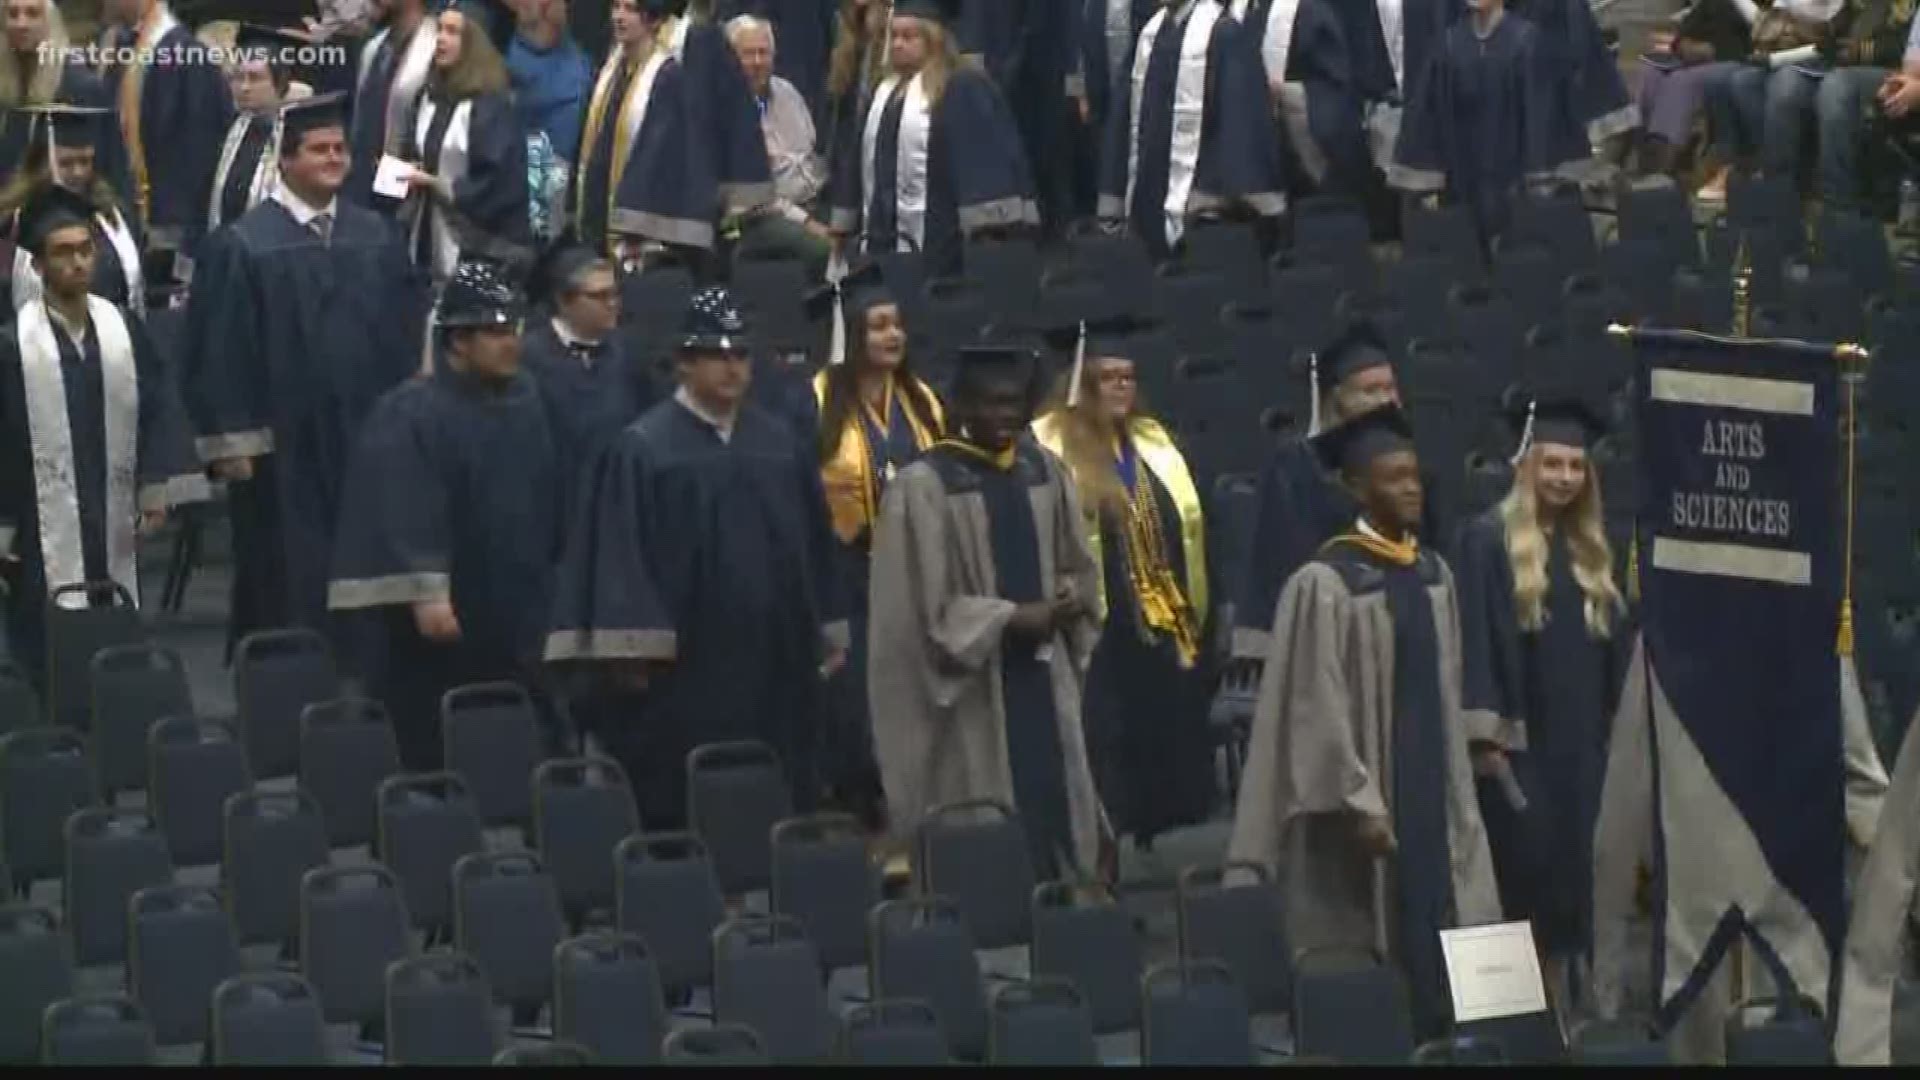 Congratulations to all of the graduates who walked Friday at UNF's commencement ceremony.